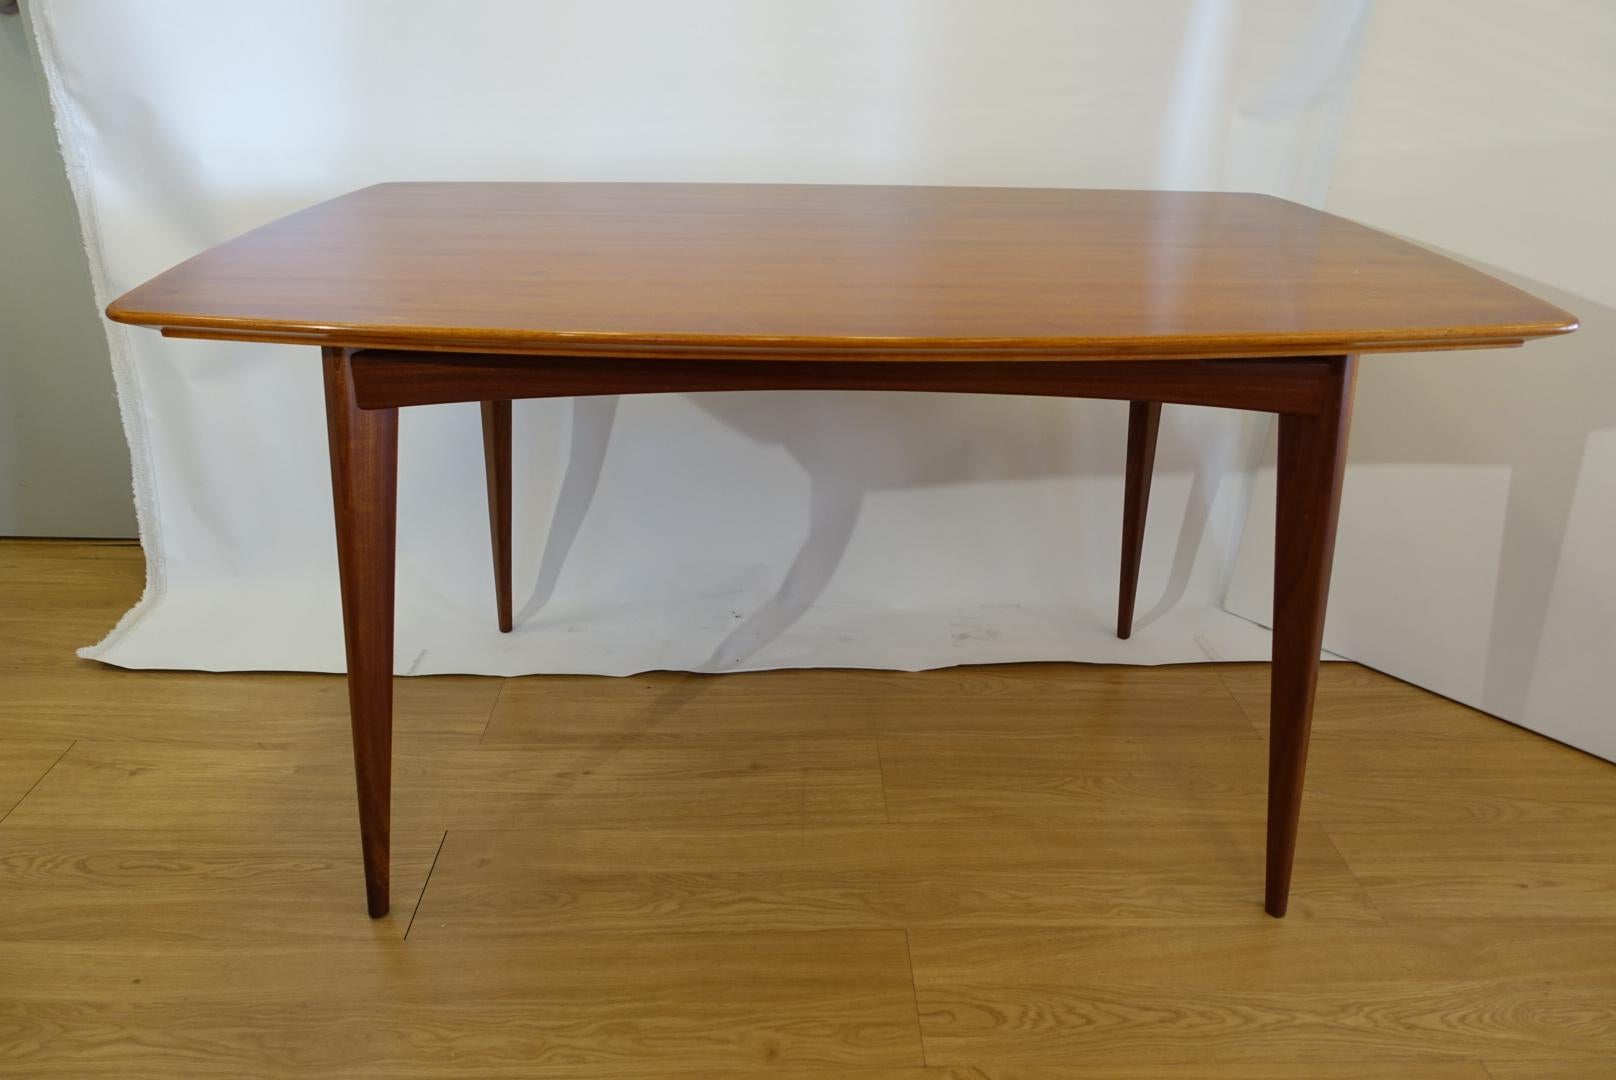 This dining table is made from Agba wood and was designed in the 1960s by José Espinho for Olaio. It is non extendable.